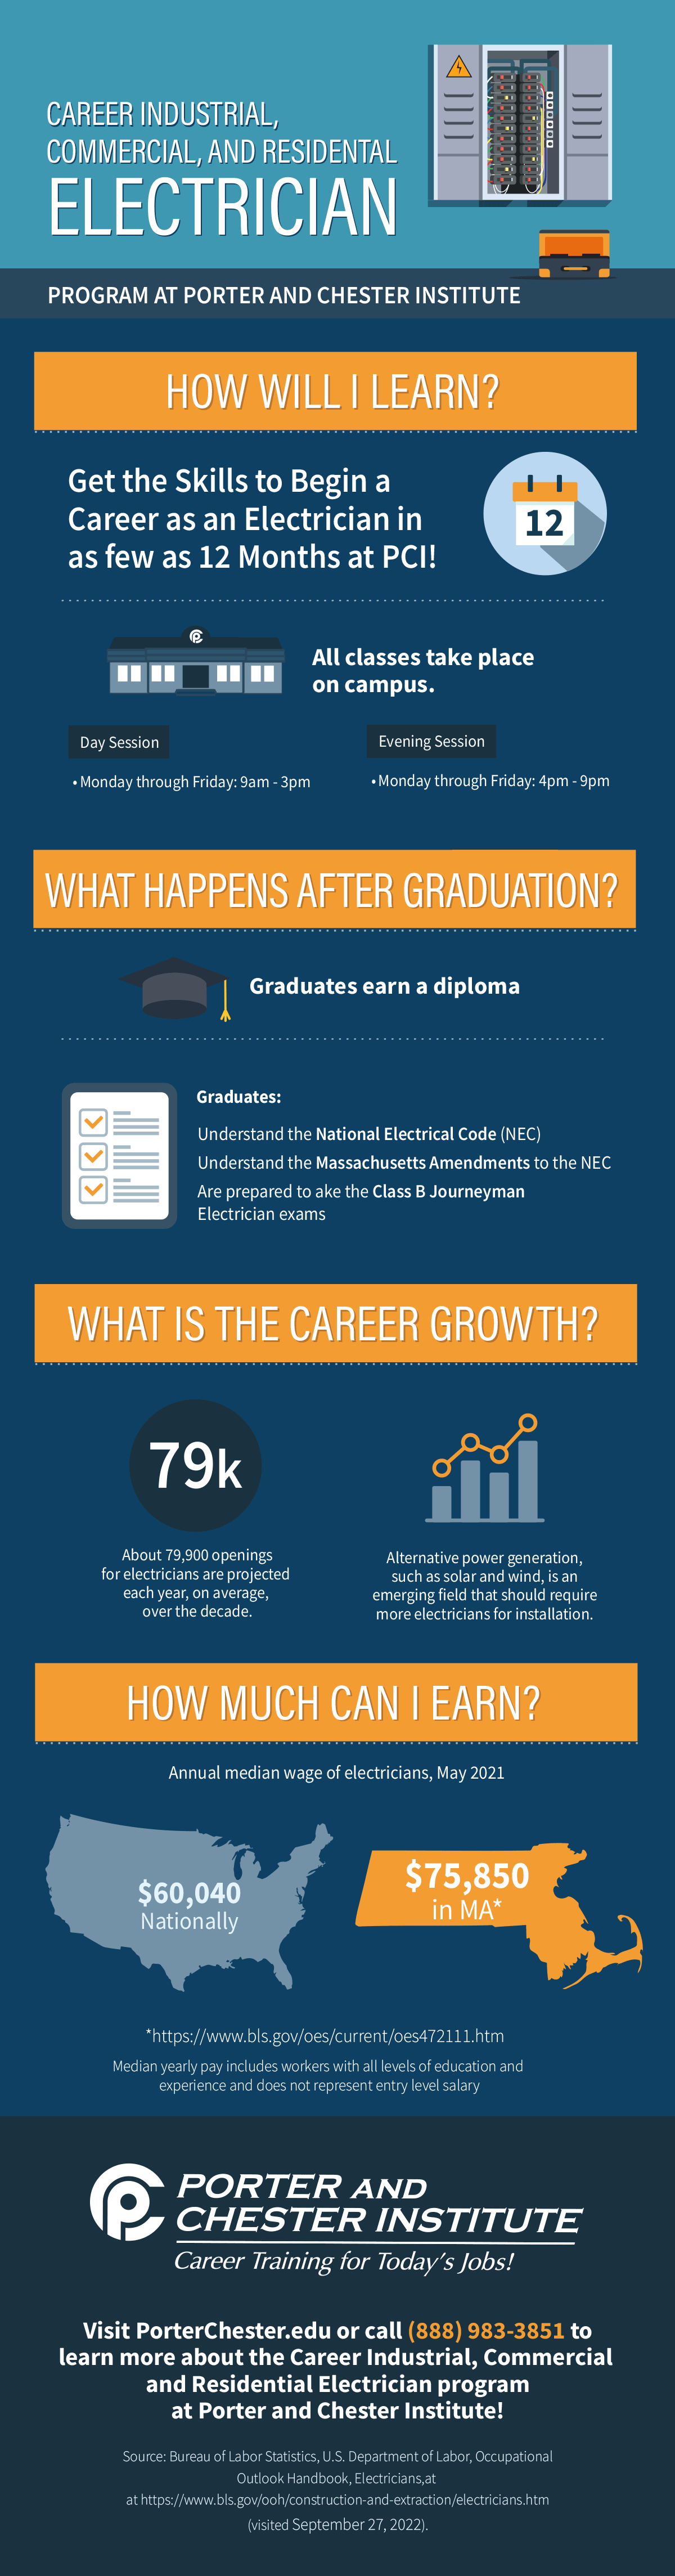 Career Industrial, Commercial and Residential Electrician Program Facts Infographic